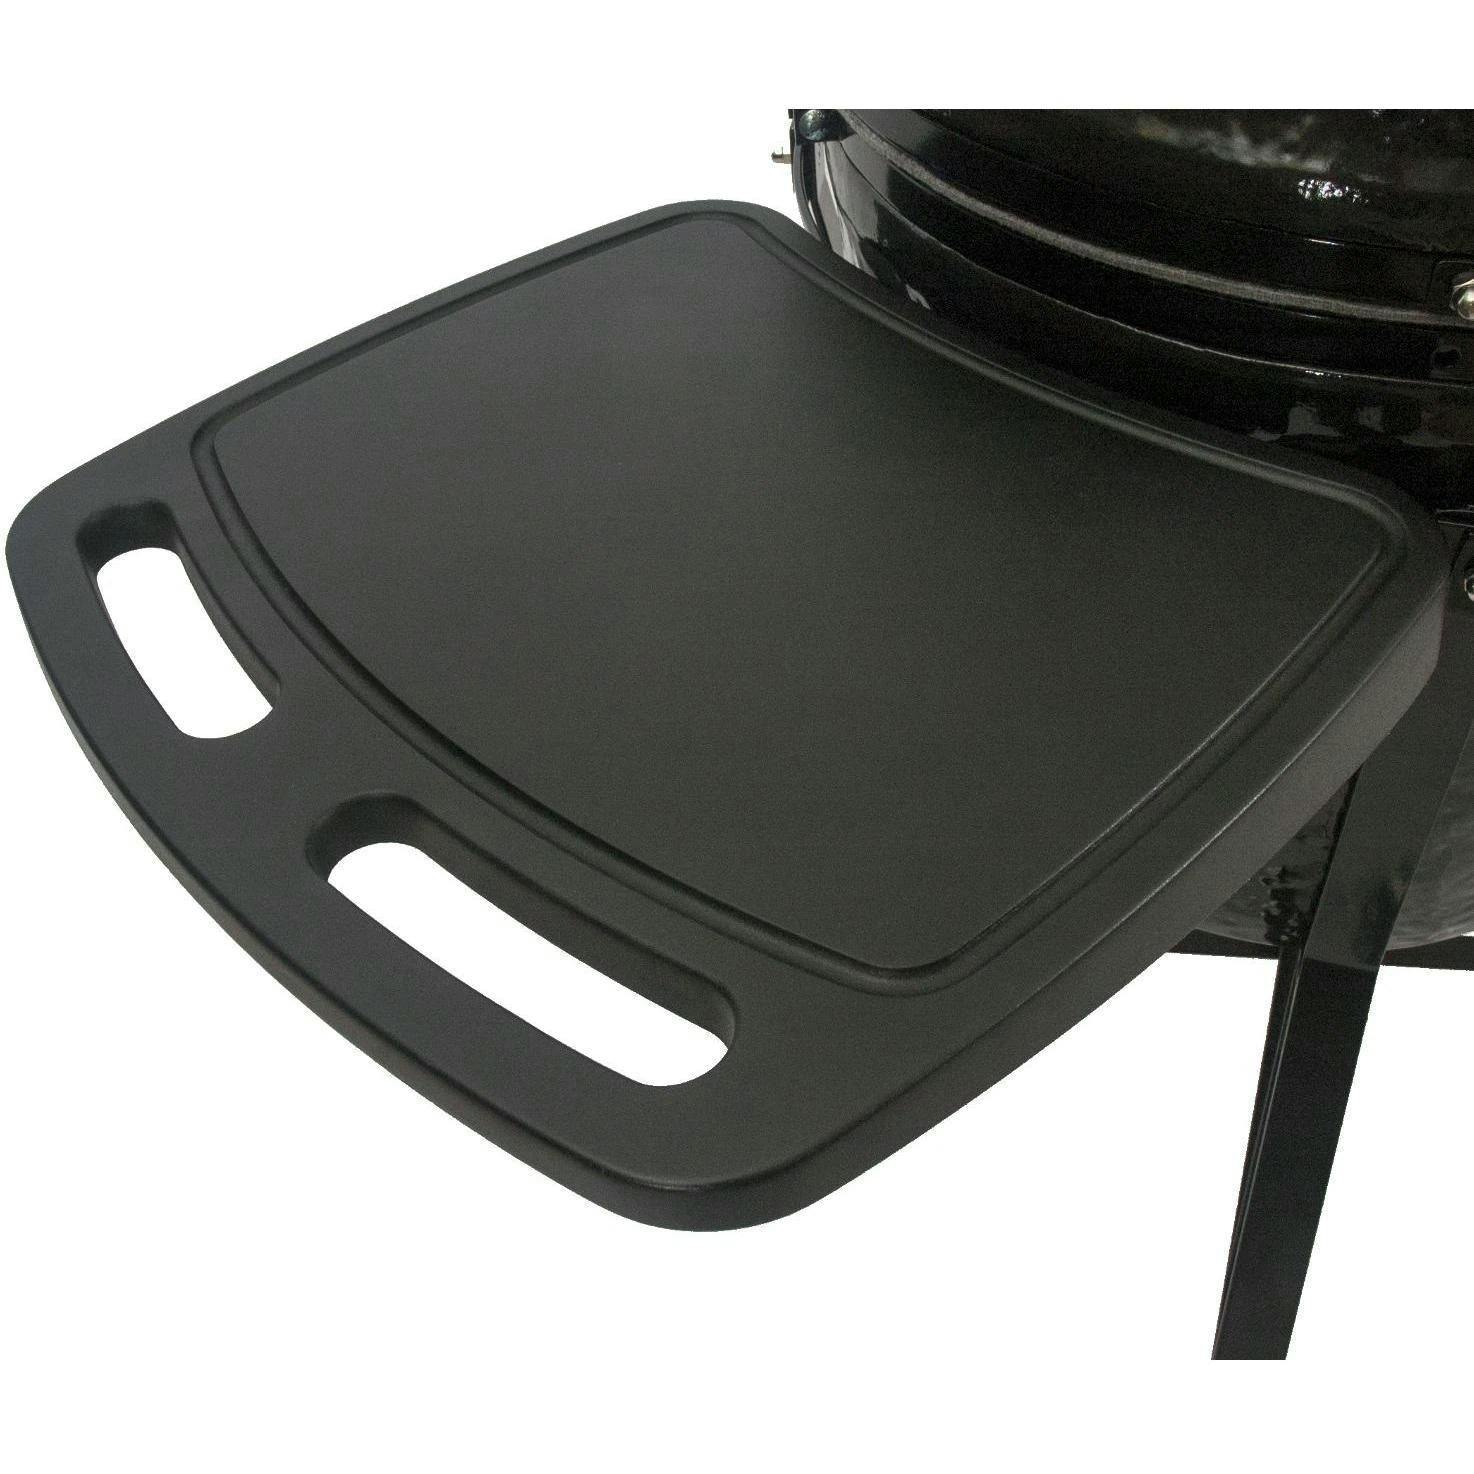 Primo All-In-One Oval XL 400 Ceramic Kamado Grill with Cradle, Side Shelves, and Stainless Steel Grates